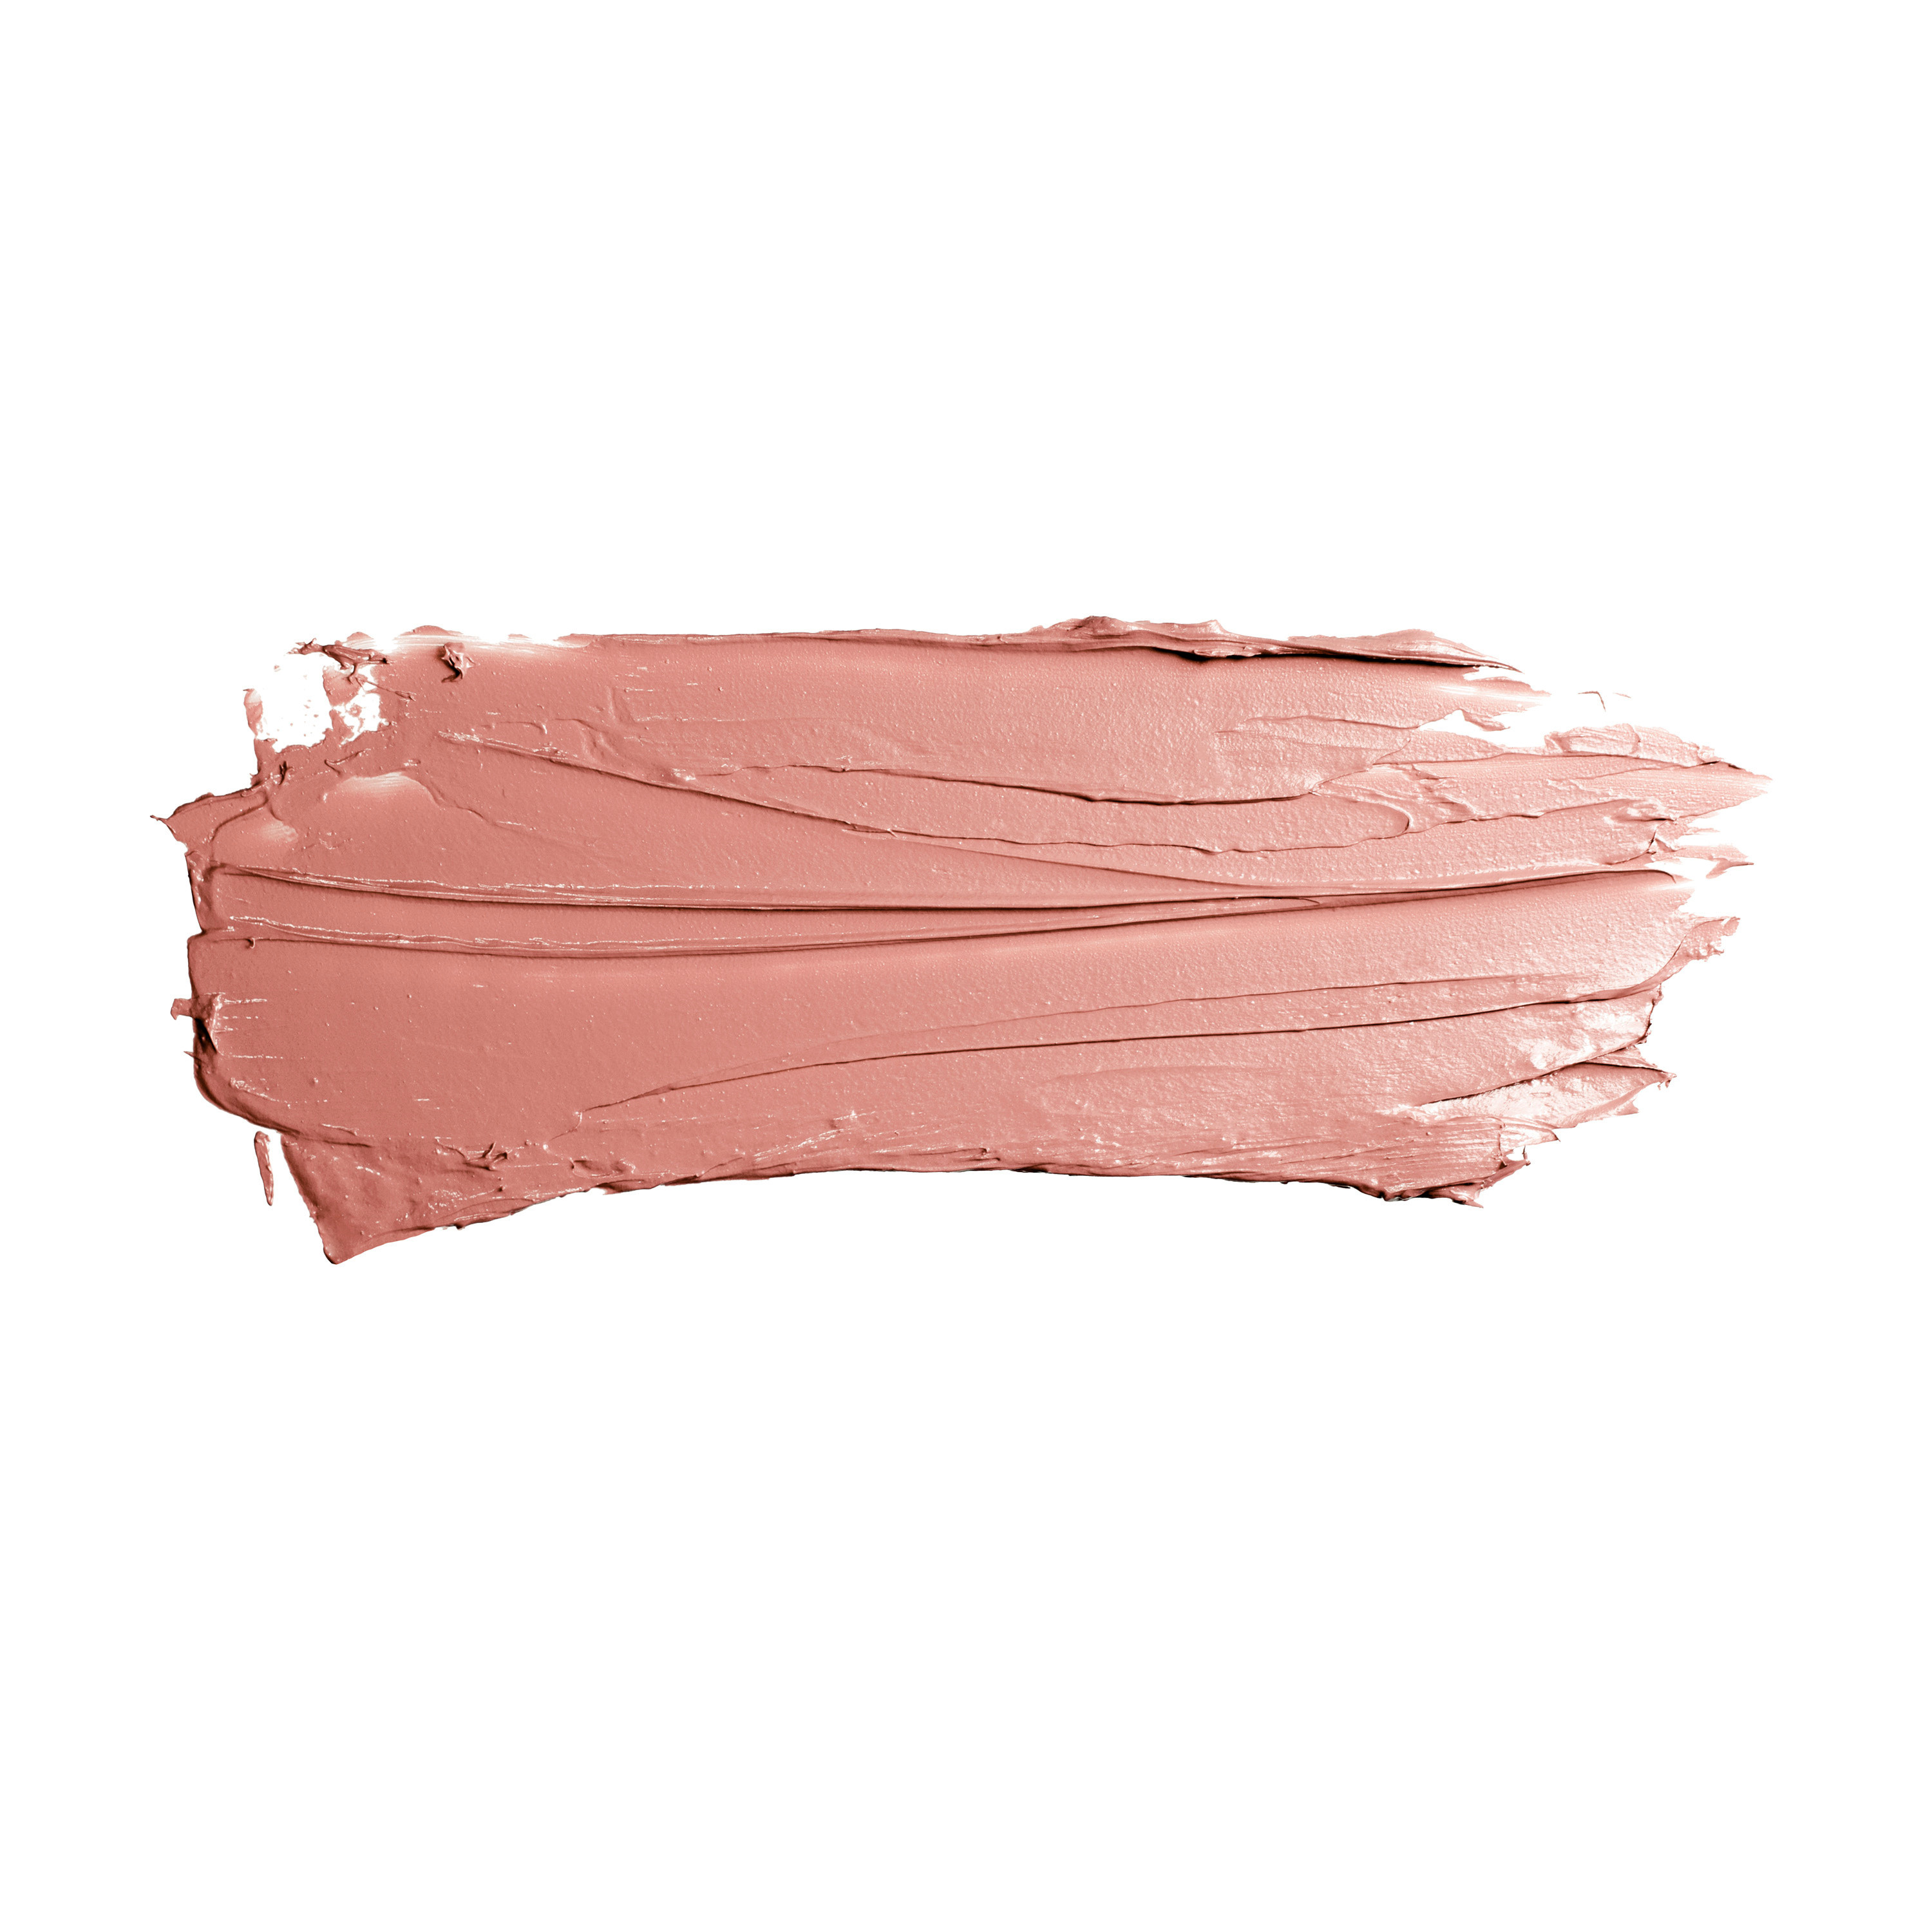 Refill il rossetto creamy - 01 chai tea, Nude, large image number 1